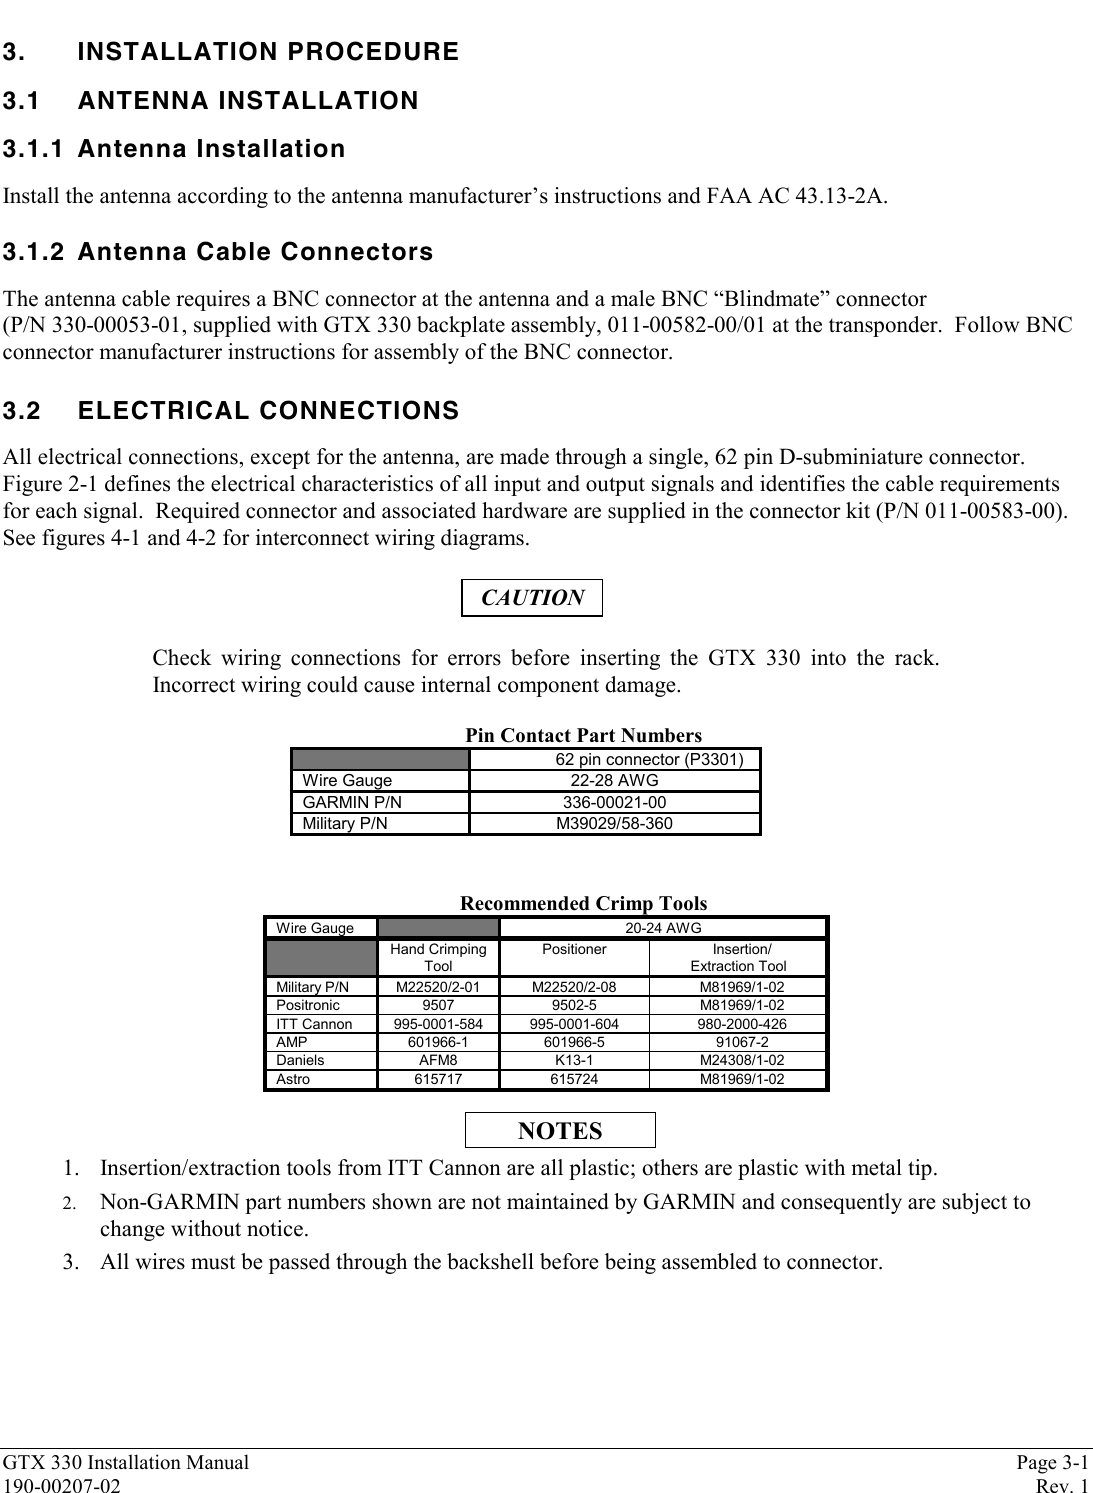 GTX 330 Installation Manual Page 3-1190-00207-02 Rev. 13. INSTALLATION PROCEDURE3.1 ANTENNA INSTALLATION3.1.1 Antenna InstallationInstall the antenna according to the antenna manufacturer’s instructions and FAA AC 43.13-2A.3.1.2 Antenna Cable ConnectorsThe antenna cable requires a BNC connector at the antenna and a male BNC “Blindmate” connector(P/N 330-00053-01, supplied with GTX 330 backplate assembly, 011-00582-00/01 at the transponder.  Follow BNCconnector manufacturer instructions for assembly of the BNC connector.3.2 ELECTRICAL CONNECTIONSAll electrical connections, except for the antenna, are made through a single, 62 pin D-subminiature connector.Figure 2-1 defines the electrical characteristics of all input and output signals and identifies the cable requirementsfor each signal.  Required connector and associated hardware are supplied in the connector kit (P/N 011-00583-00).See figures 4-1 and 4-2 for interconnect wiring diagrams.CAUTIONCheck wiring connections for errors before inserting the GTX 330 into the rack.Incorrect wiring could cause internal component damage.Pin Contact Part Numbers62 pin connector (P3301)Wire Gauge 22-28 AWGGARMIN P/N 336-00021-00Military P/N M39029/58-360Recommended Crimp ToolsWire Gauge 20-24 AWGHand CrimpingToolPositioner Insertion/Extraction ToolMilitary P/N M22520/2-01 M22520/2-08 M81969/1-02Positronic 9507 9502-5 M81969/1-02ITT Cannon 995-0001-584 995-0001-604 980-2000-426AMP 601966-1 601966-5 91067-2Daniels AFM8 K13-1 M24308/1-02Astro 615717 615724 M81969/1-02NOTES1. Insertion/extraction tools from ITT Cannon are all plastic; others are plastic with metal tip.2. Non-GARMIN part numbers shown are not maintained by GARMIN and consequently are subject tochange without notice.3. All wires must be passed through the backshell before being assembled to connector.